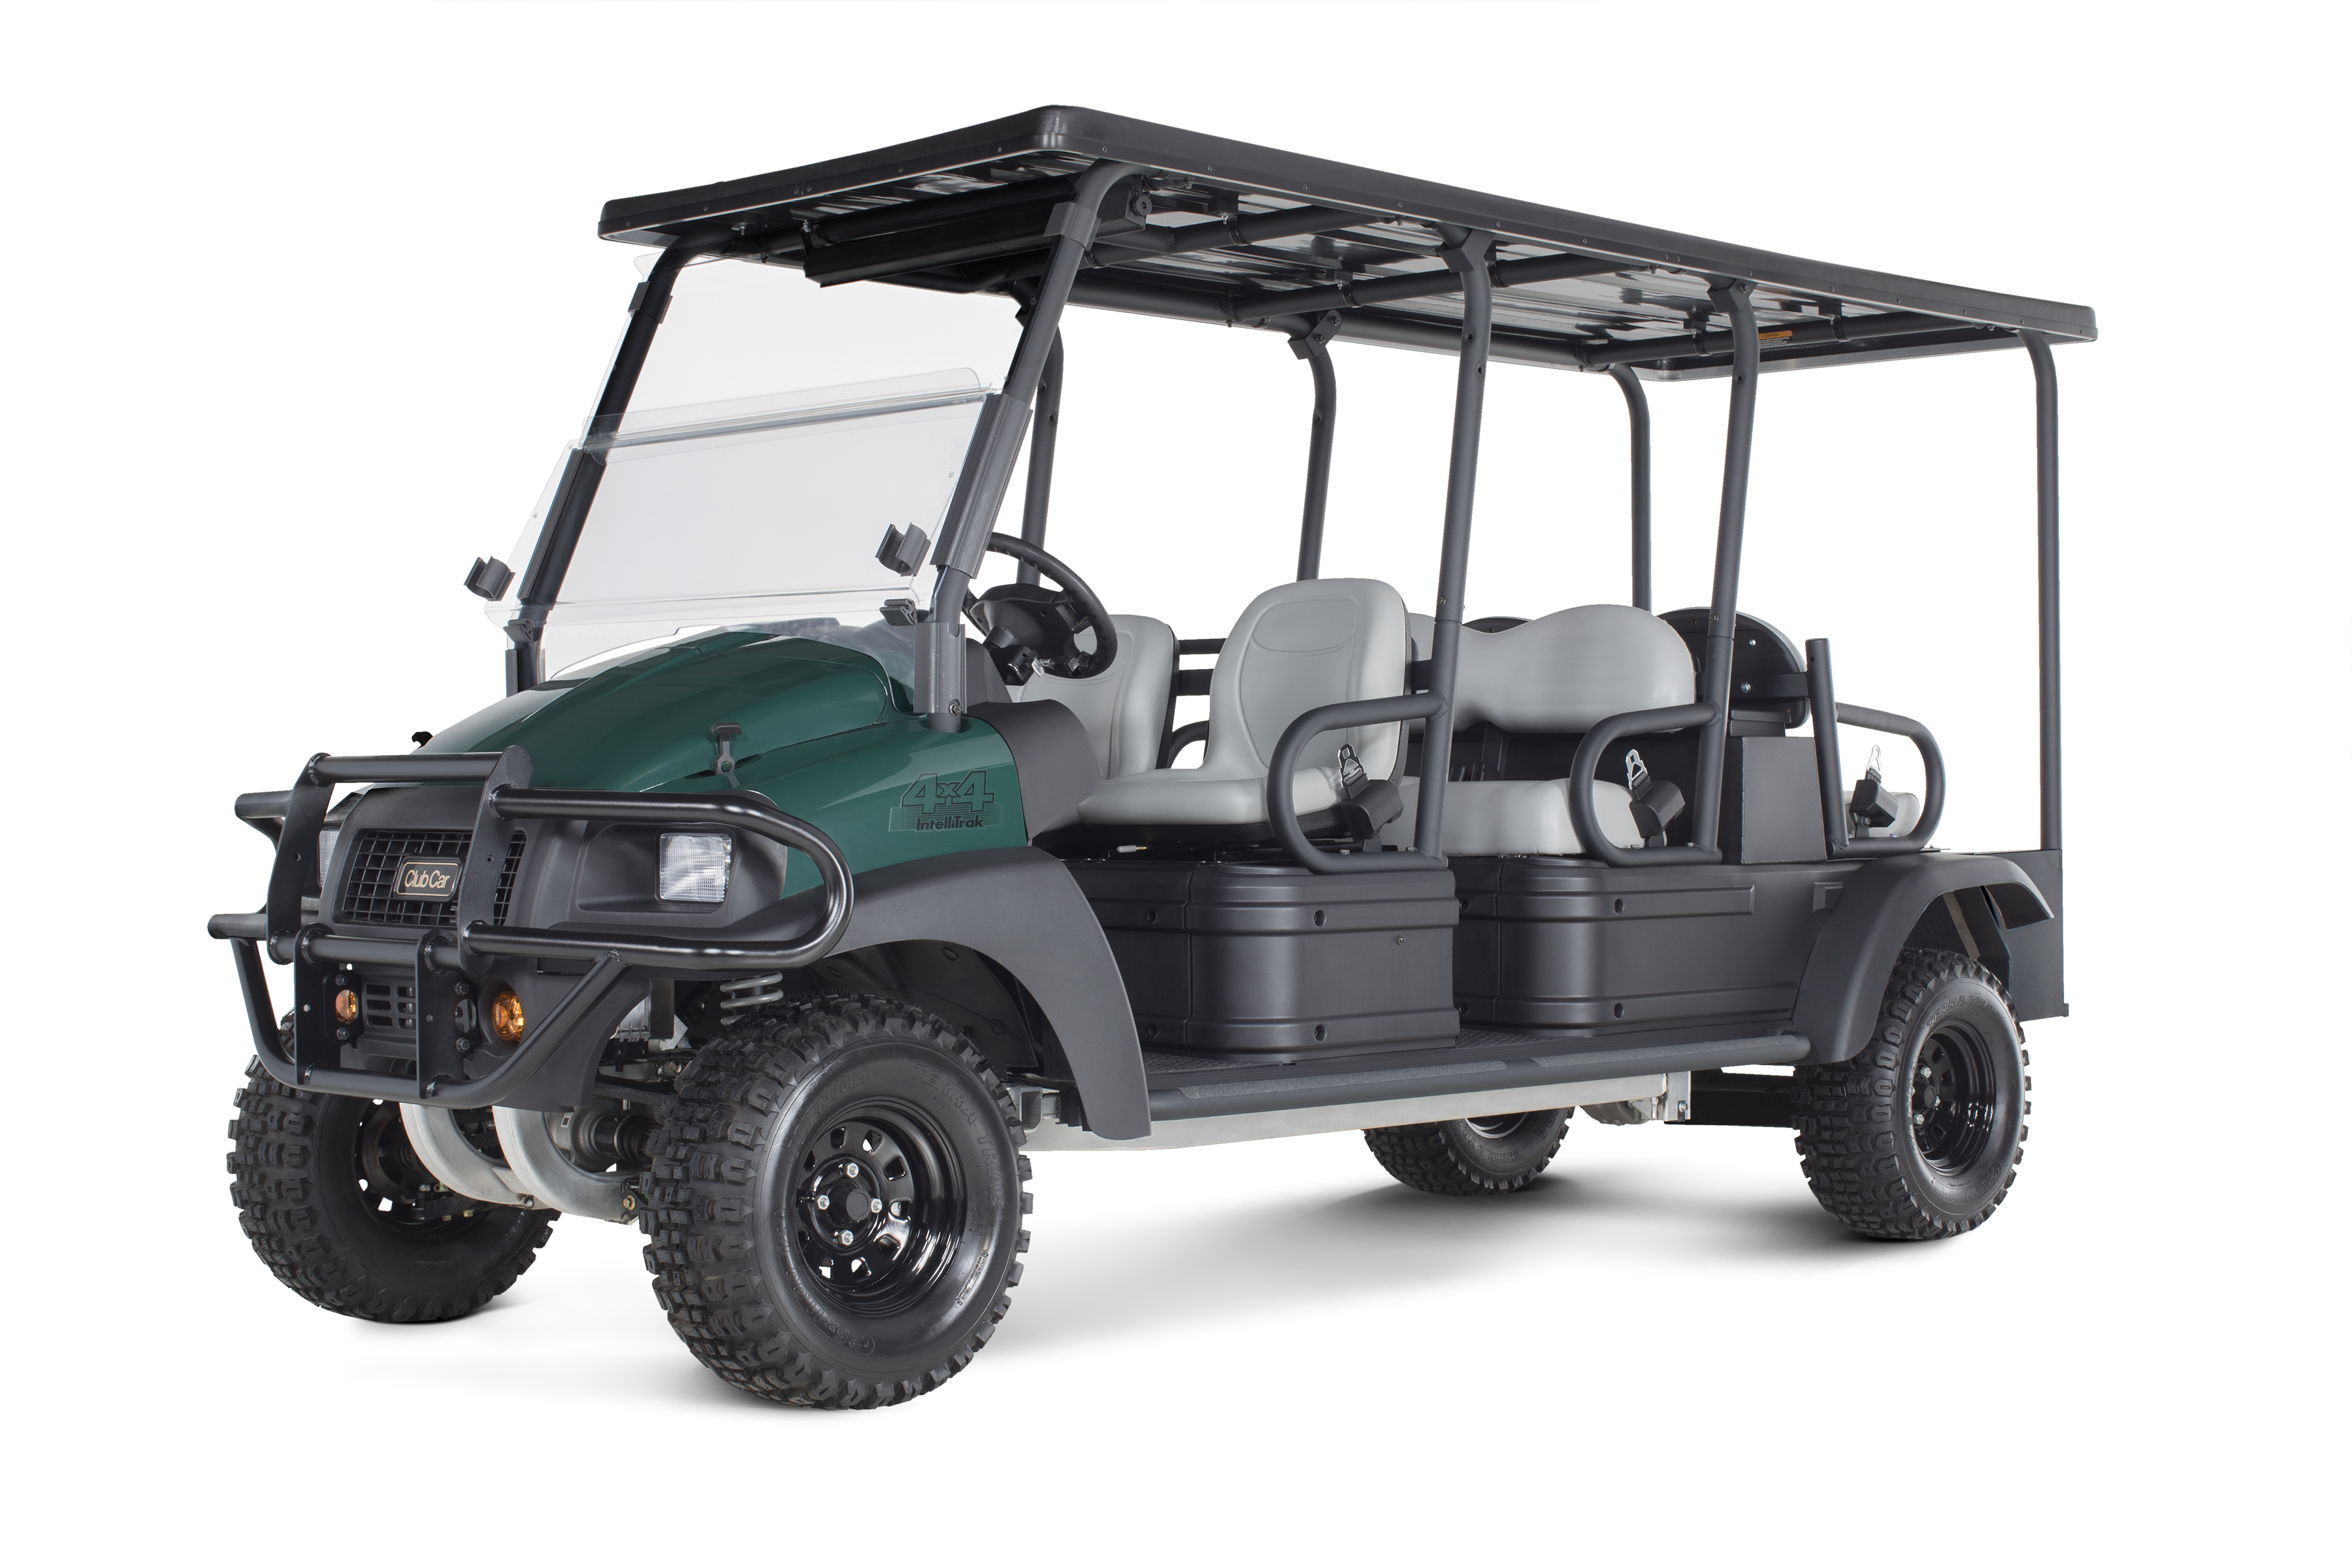 The Carryall 1700 six-passenger utility vehicle with automatic all-wheel drive carries three crews over wet, rough terrain.